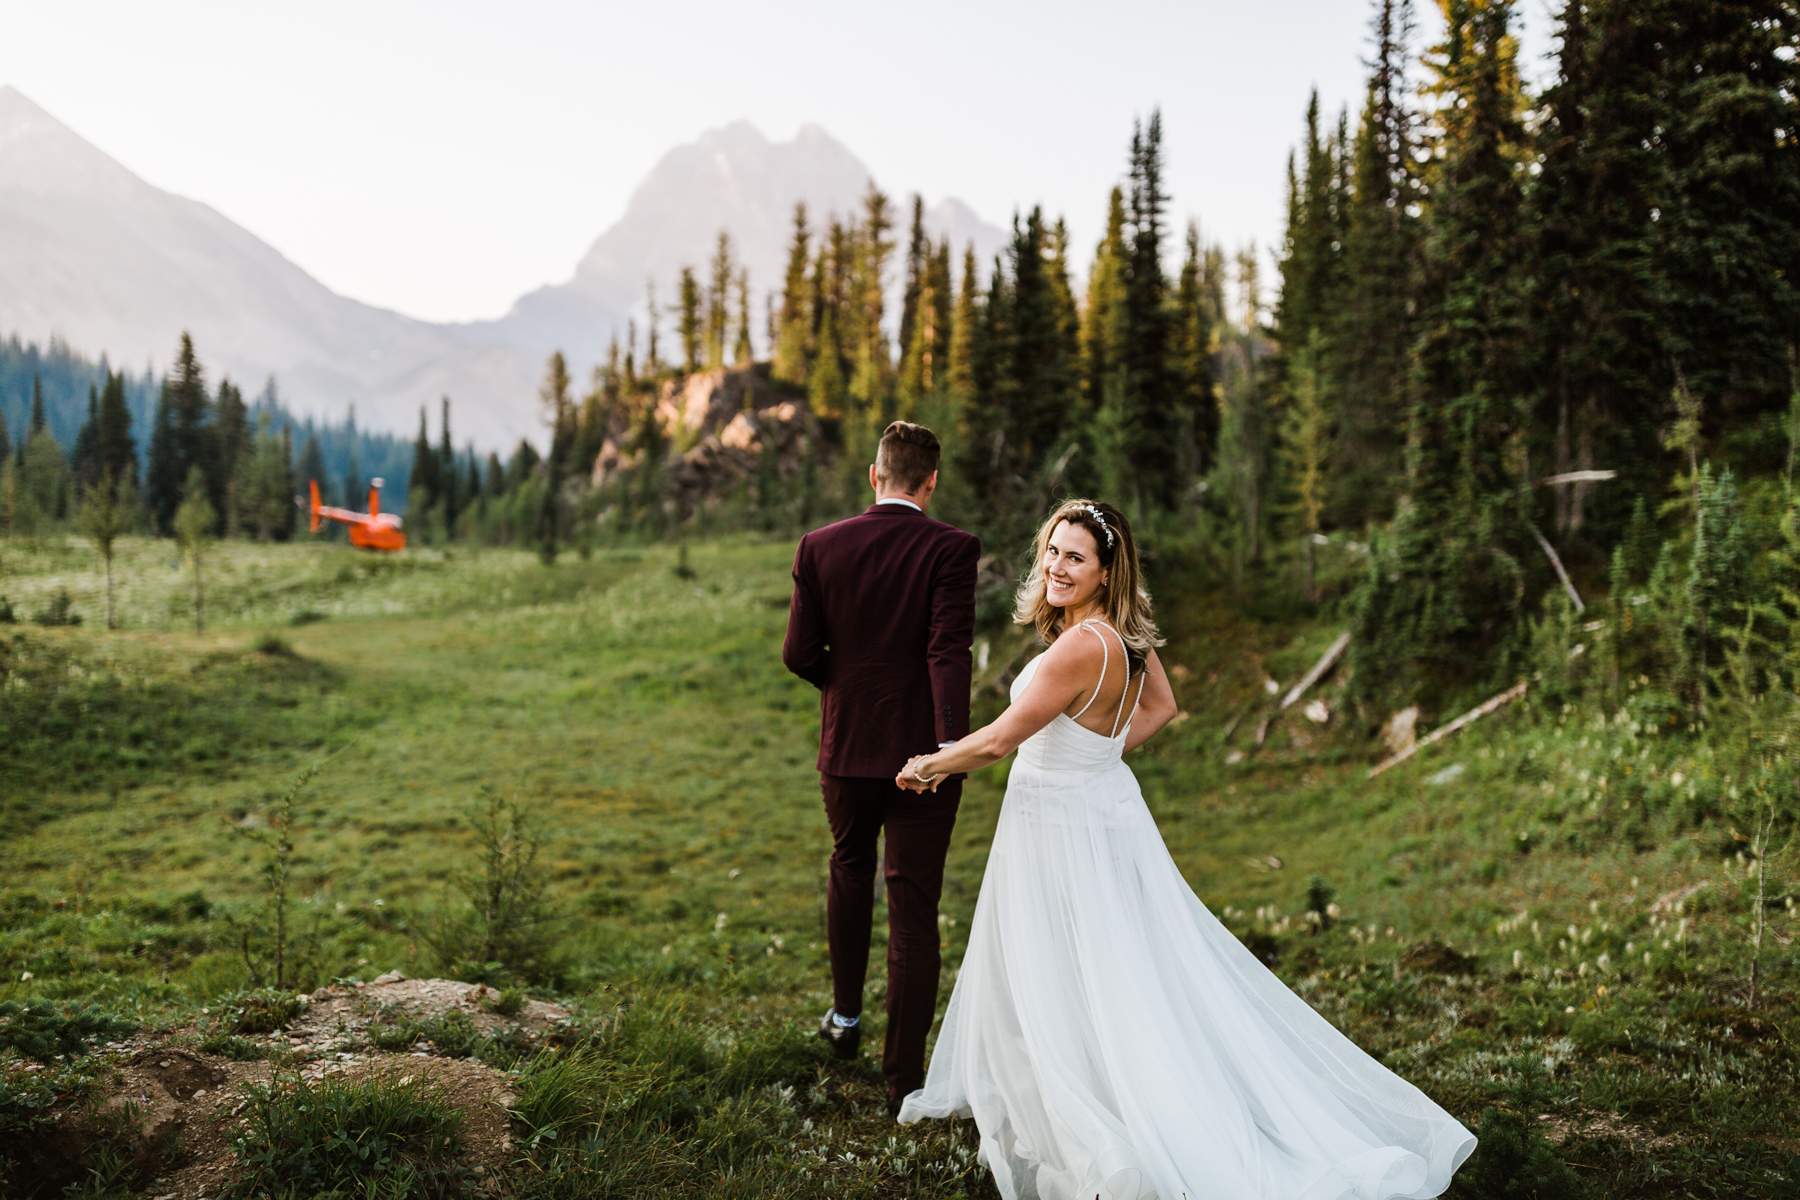 Banff Helicopter Elopement Photographers - Image 25